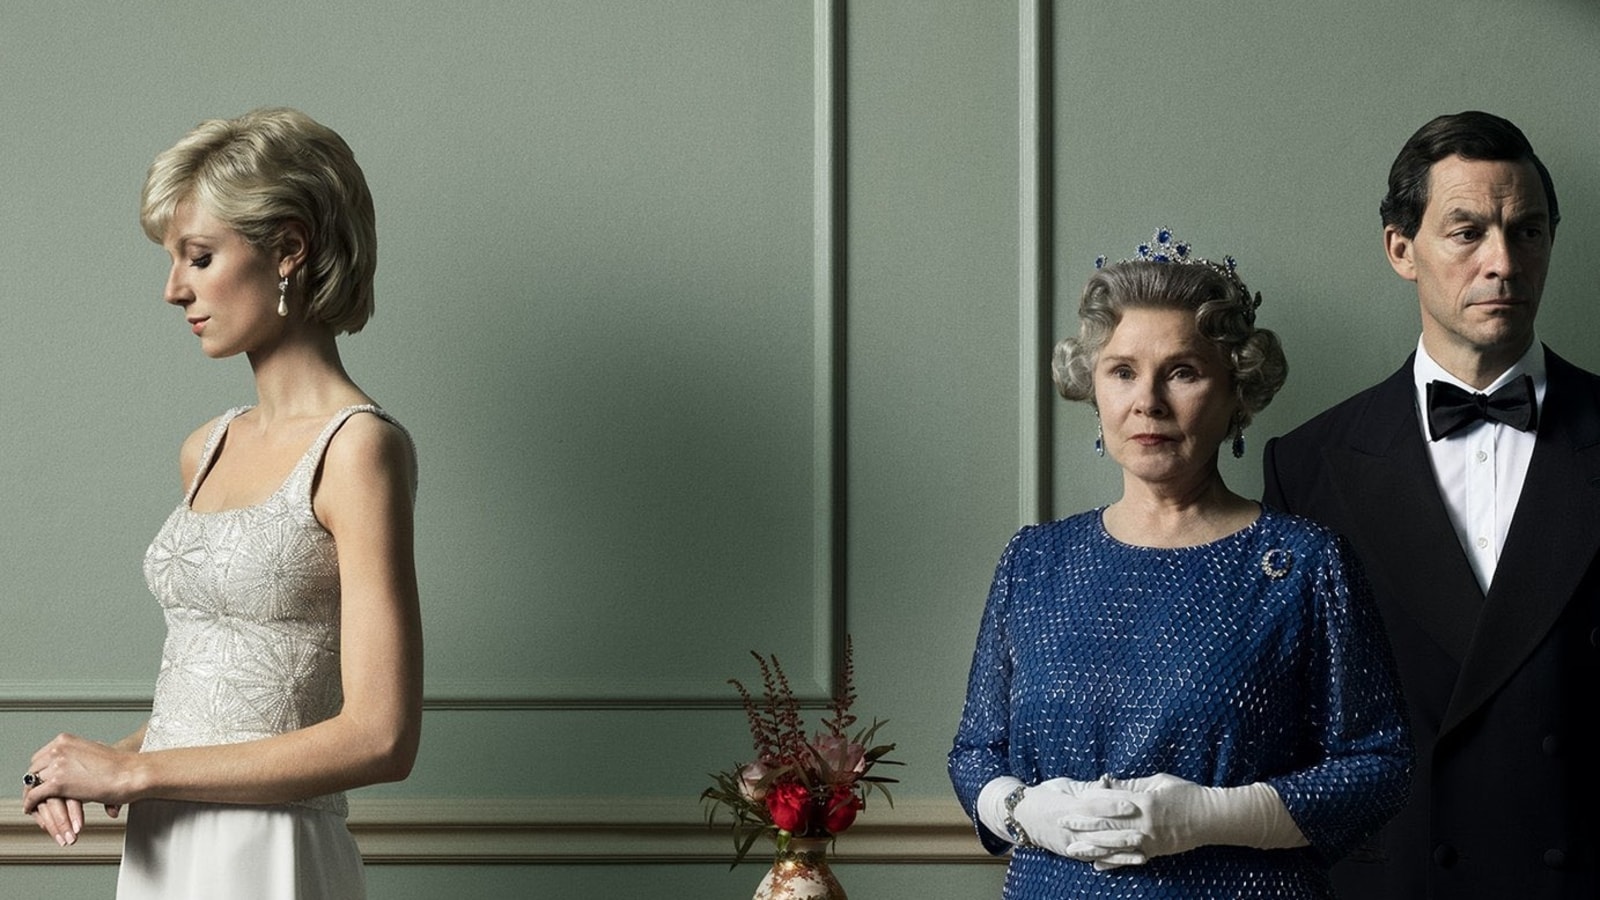 Netflix's 'The Crown' Surprise Double Dose of Royal Drama in Final Season What to Expect